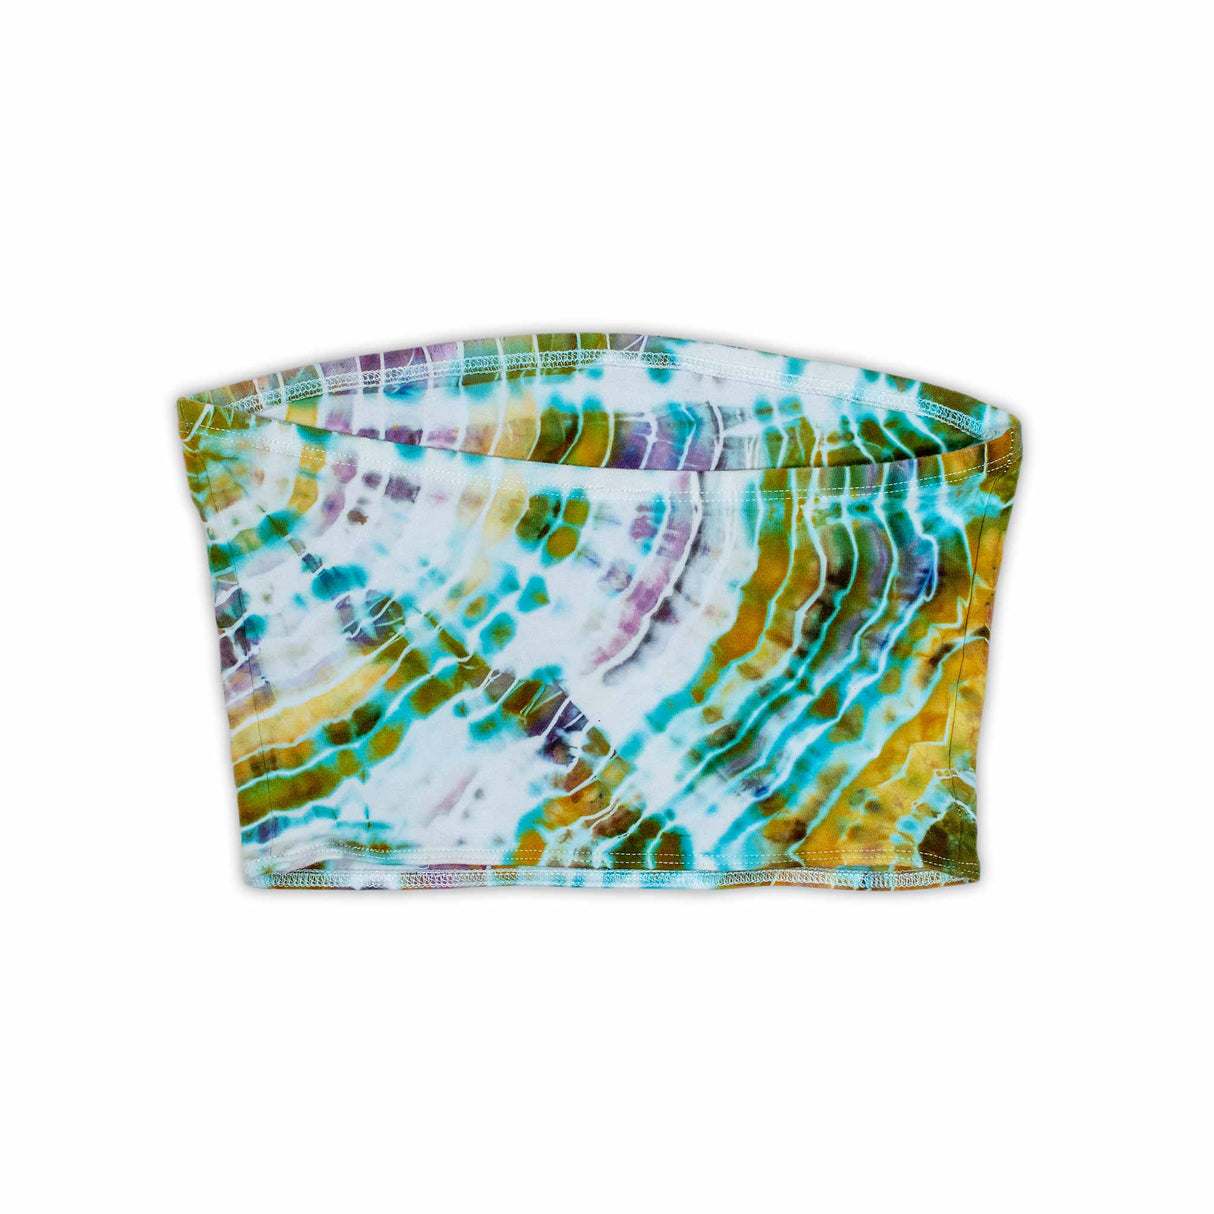 This hand-dyed bandeau top presents a mesmerizing display of cool and warm colors blending into organic shapes, akin to an aerial landscape.